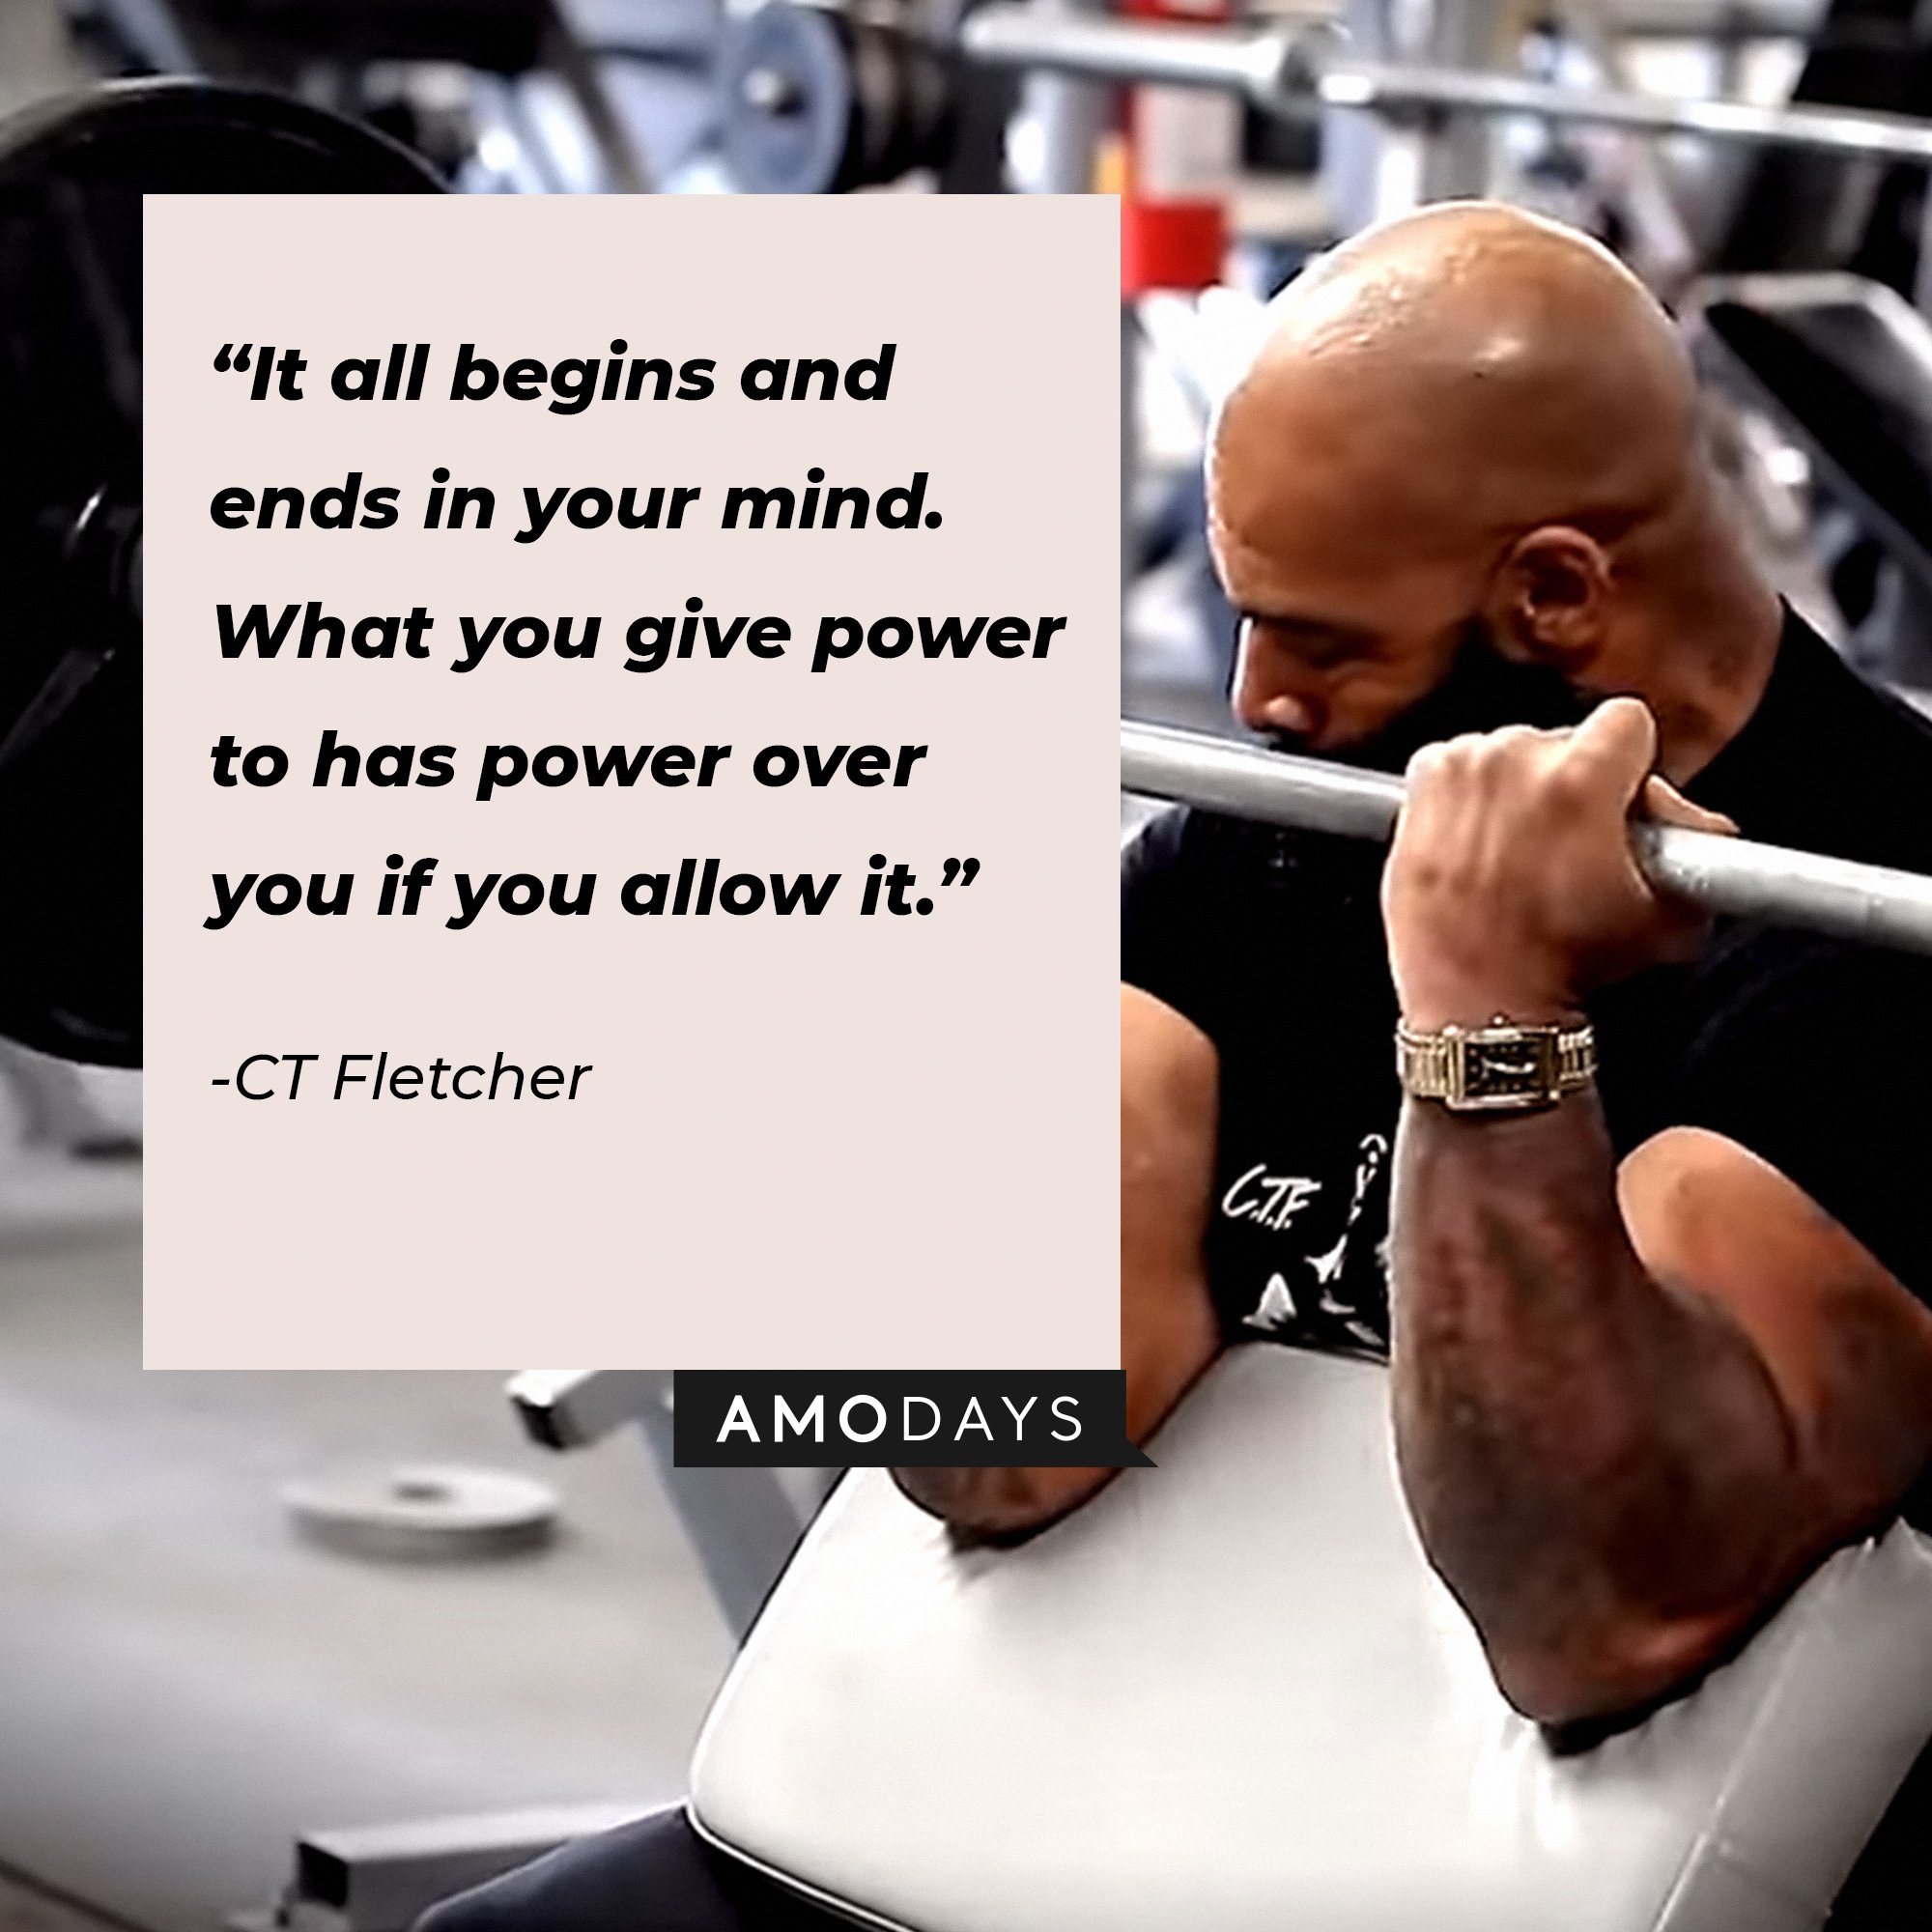 CT Fletcher's quote:\\\\\\\\u00a0"It all begins and ends in your mind. What you give power to has power over you if you allow it."\\\\\\\\u00a0| Image: AmoDays